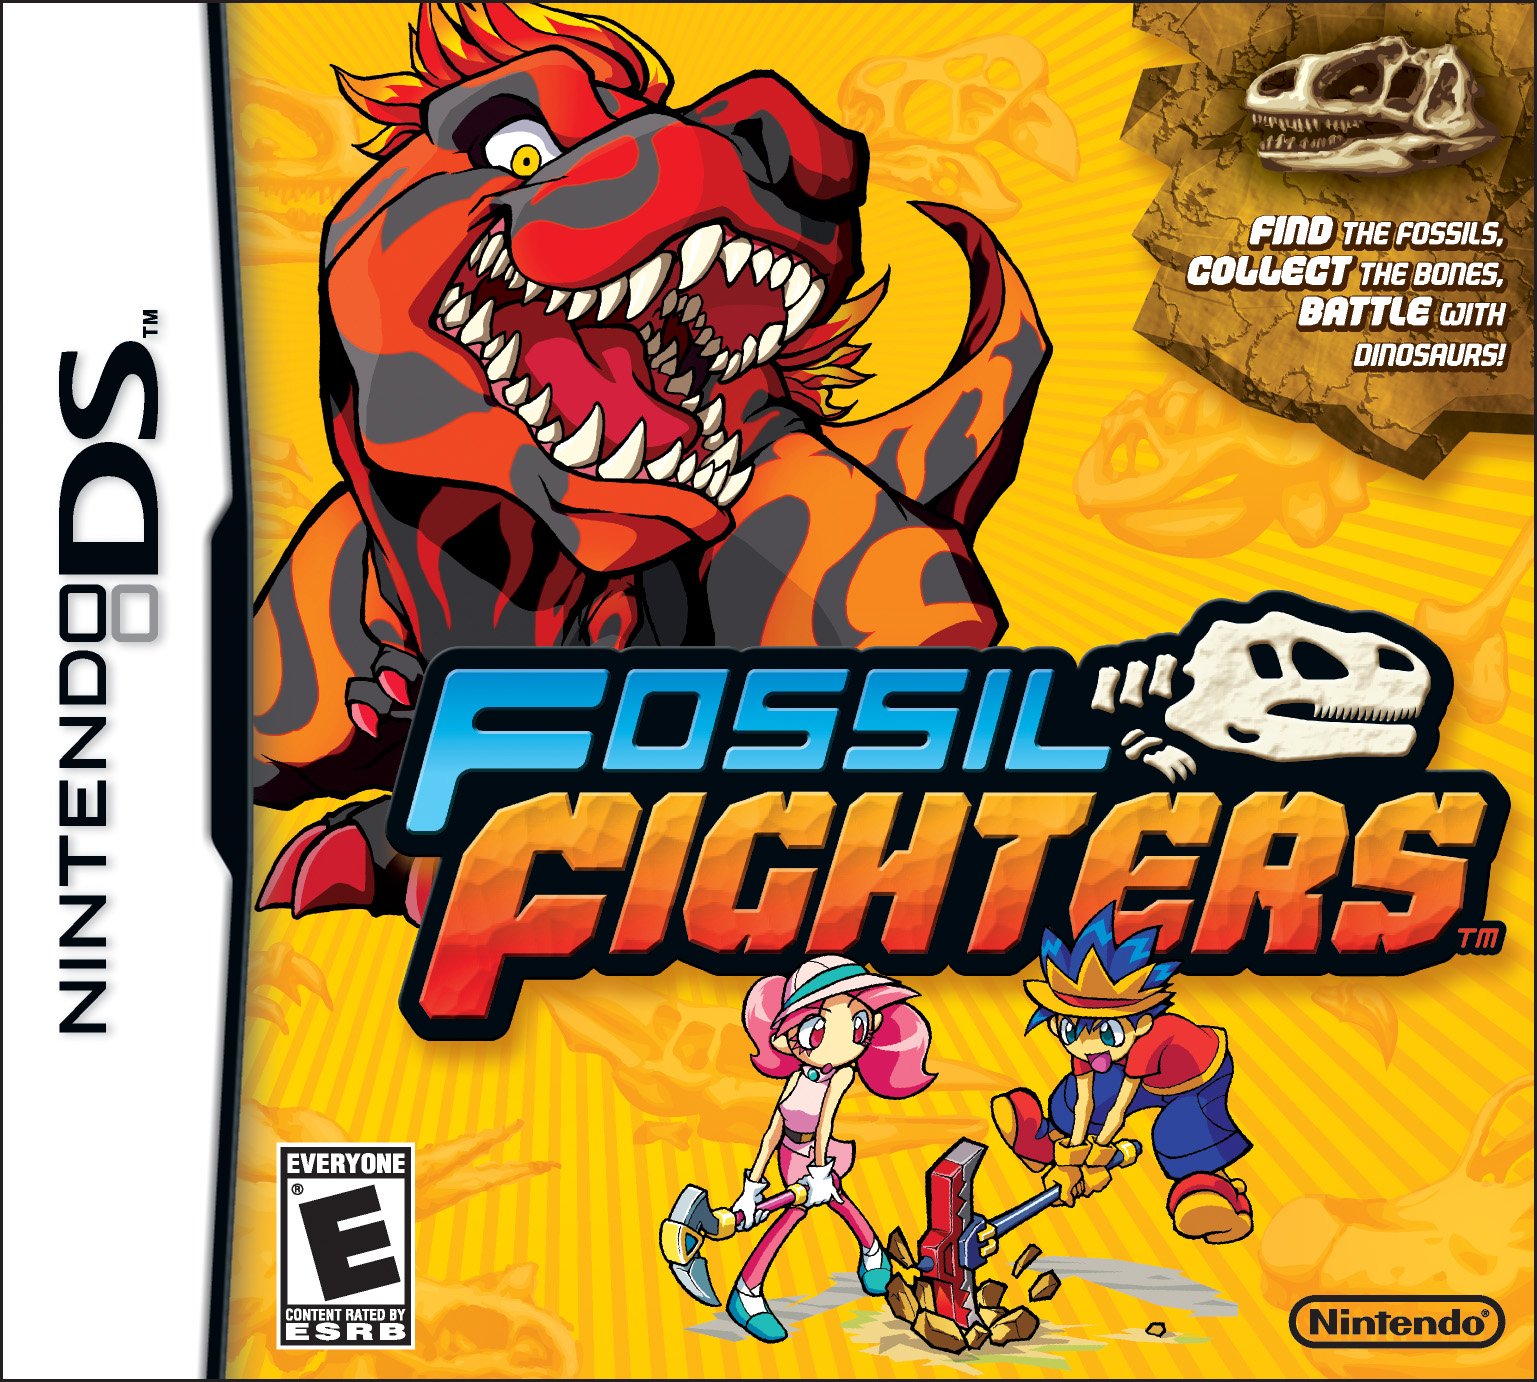 Image of Fossil Fighters